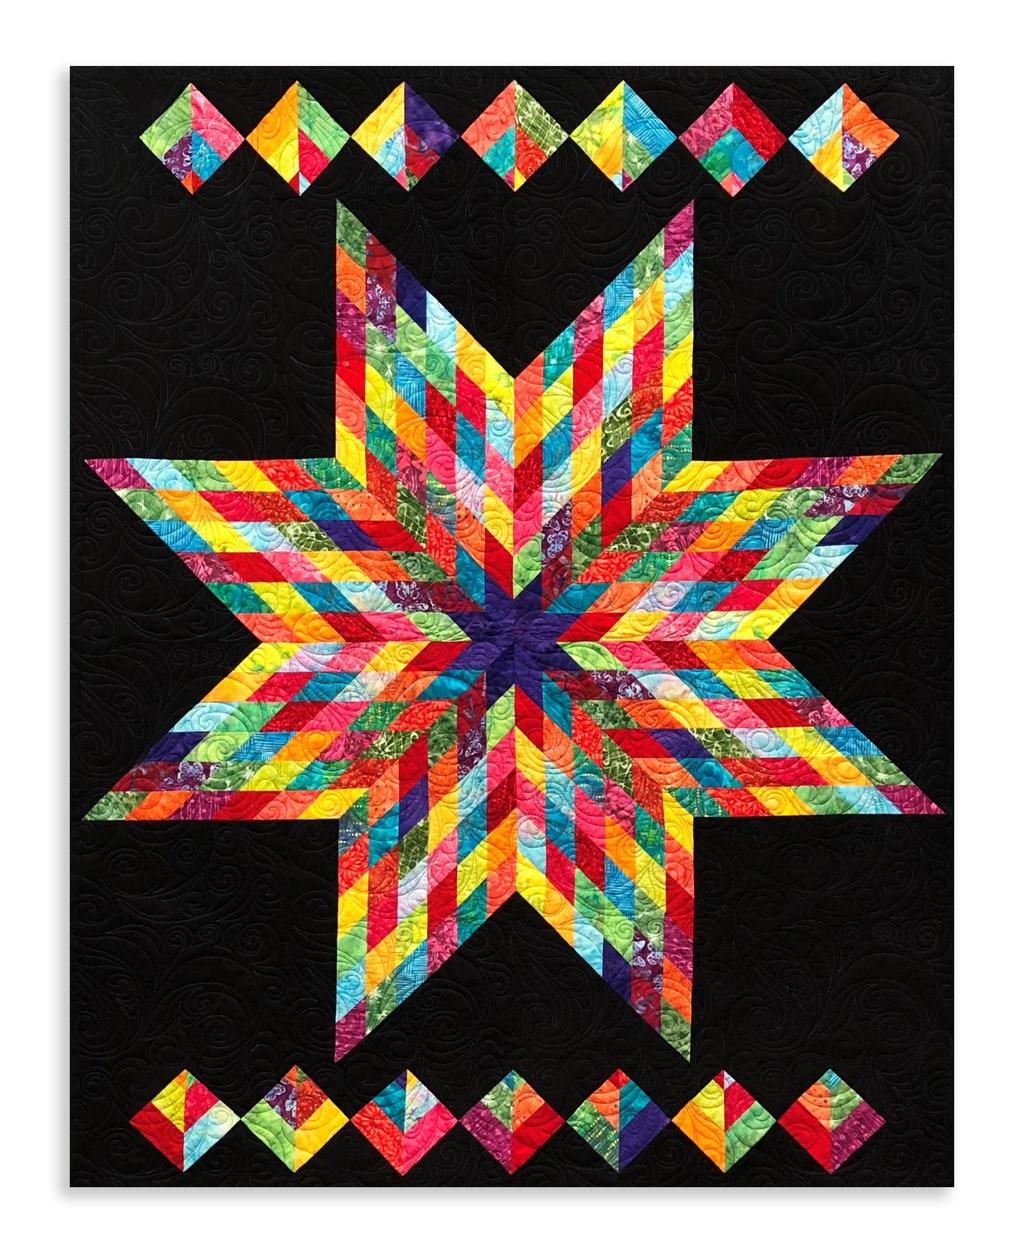 Lone Star Quilt from a Jelly Roll Written by